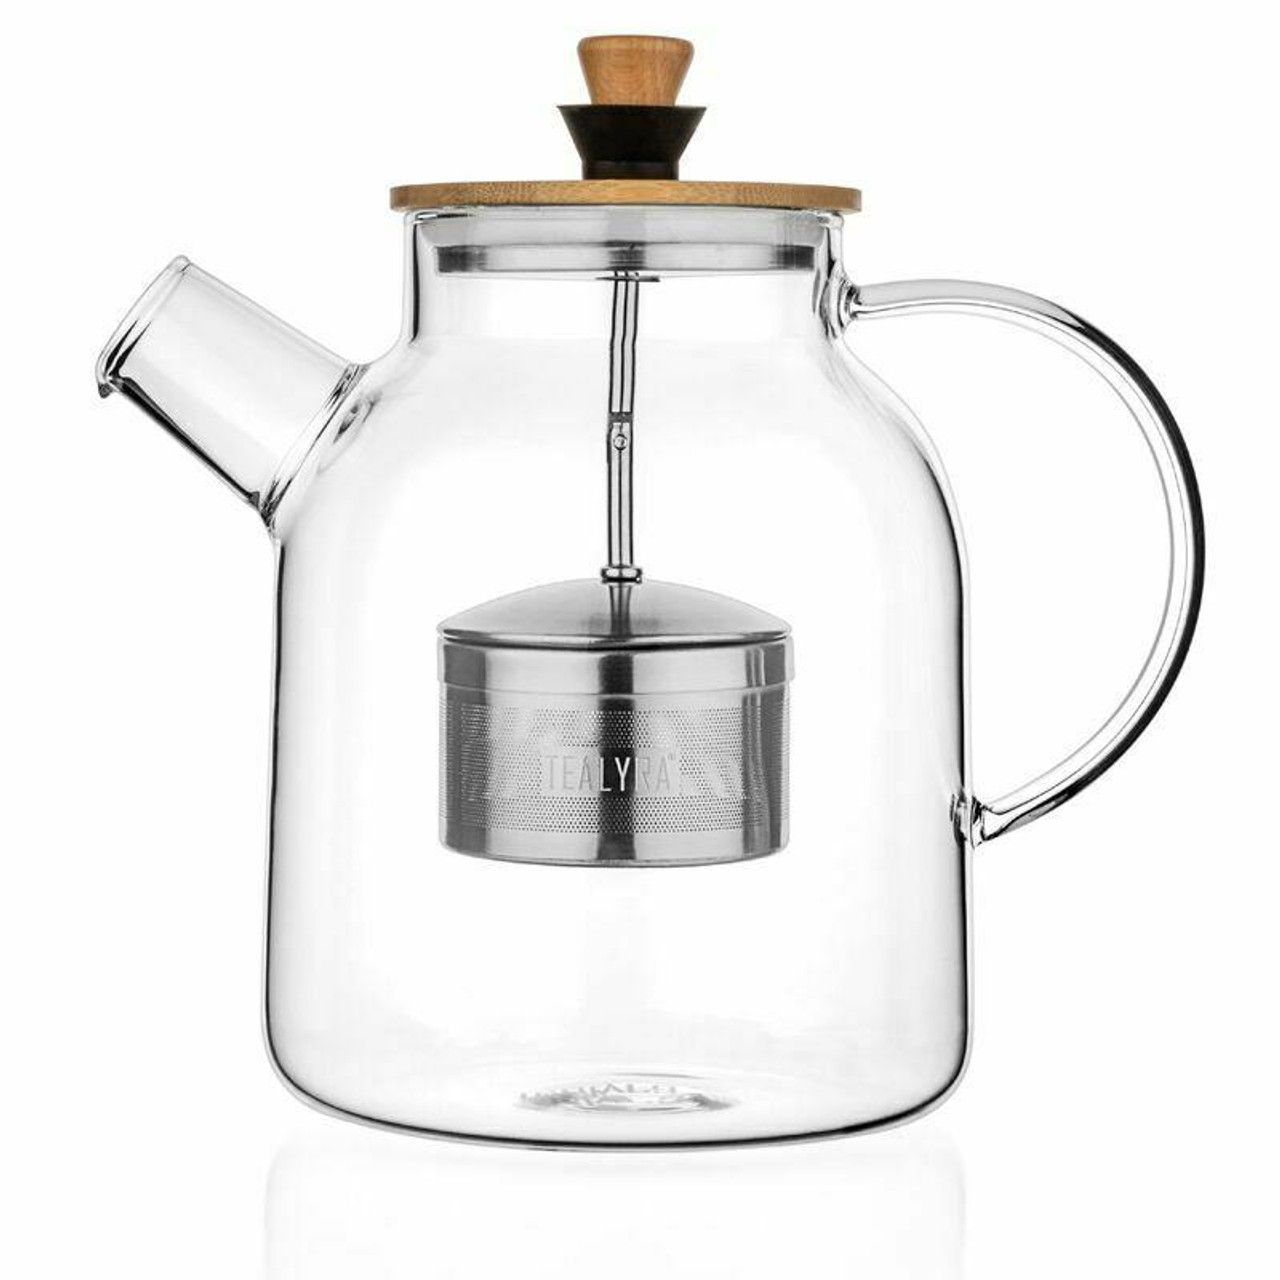 https://cdn11.bigcommerce.com/s-1nr8hwfbkq/images/stencil/1280x1280/products/2404/7168/tealyra-large-glass-teapot-kettle-w-infuser-47oz__75994.1635020773.jpg?c=2